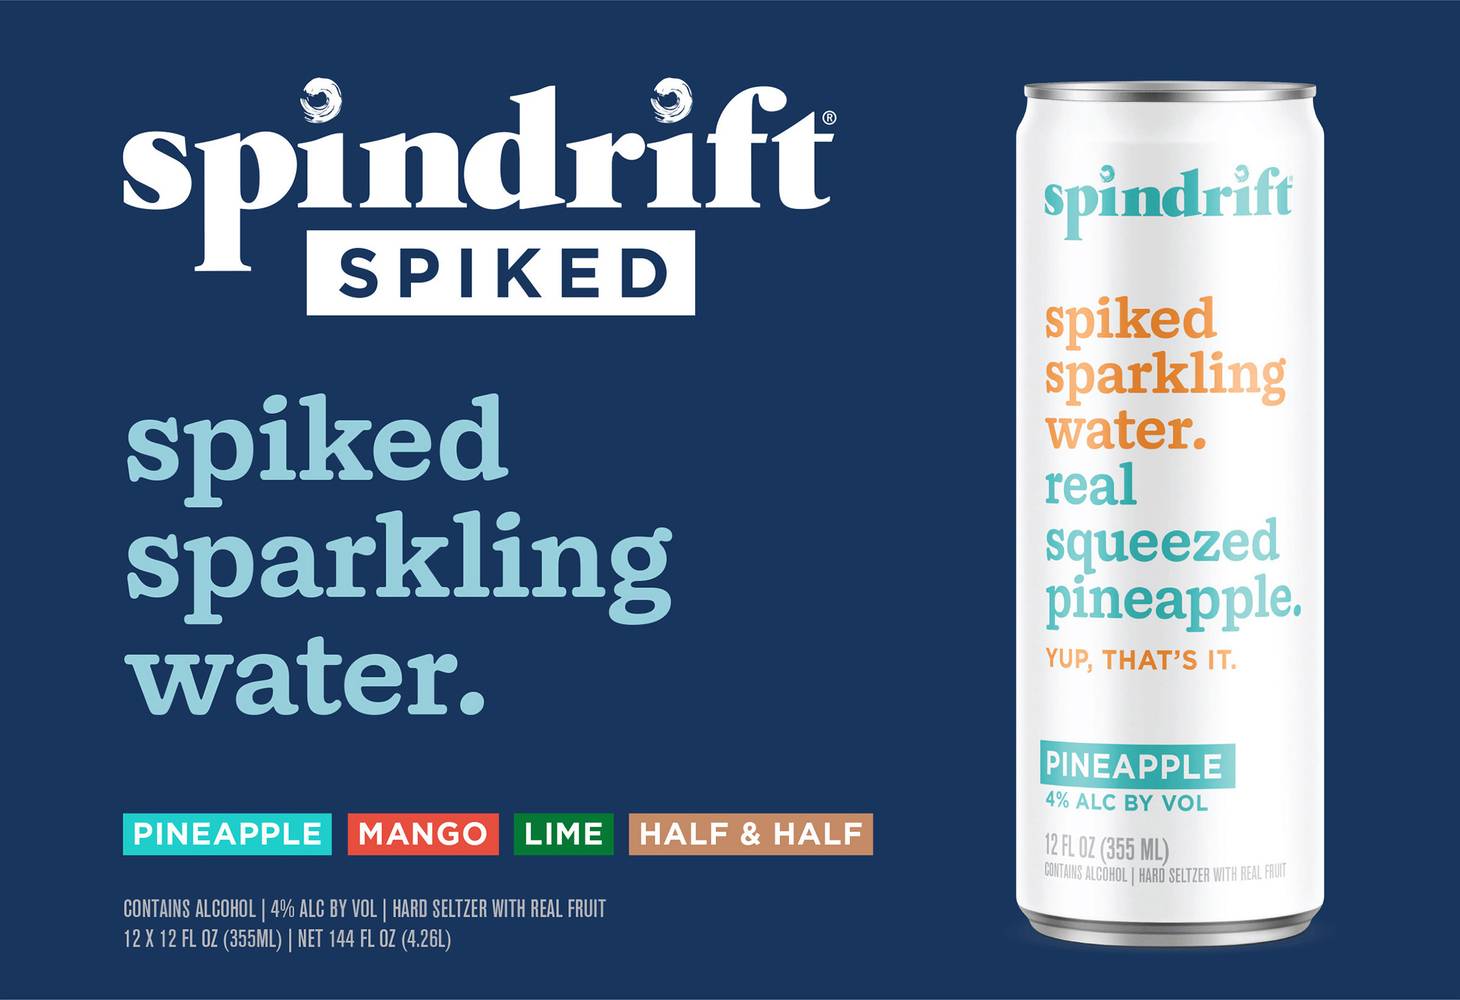 Spindrift Spiked Sparkling Water (12 pack, 12 fl oz) (pineapple mango lime)